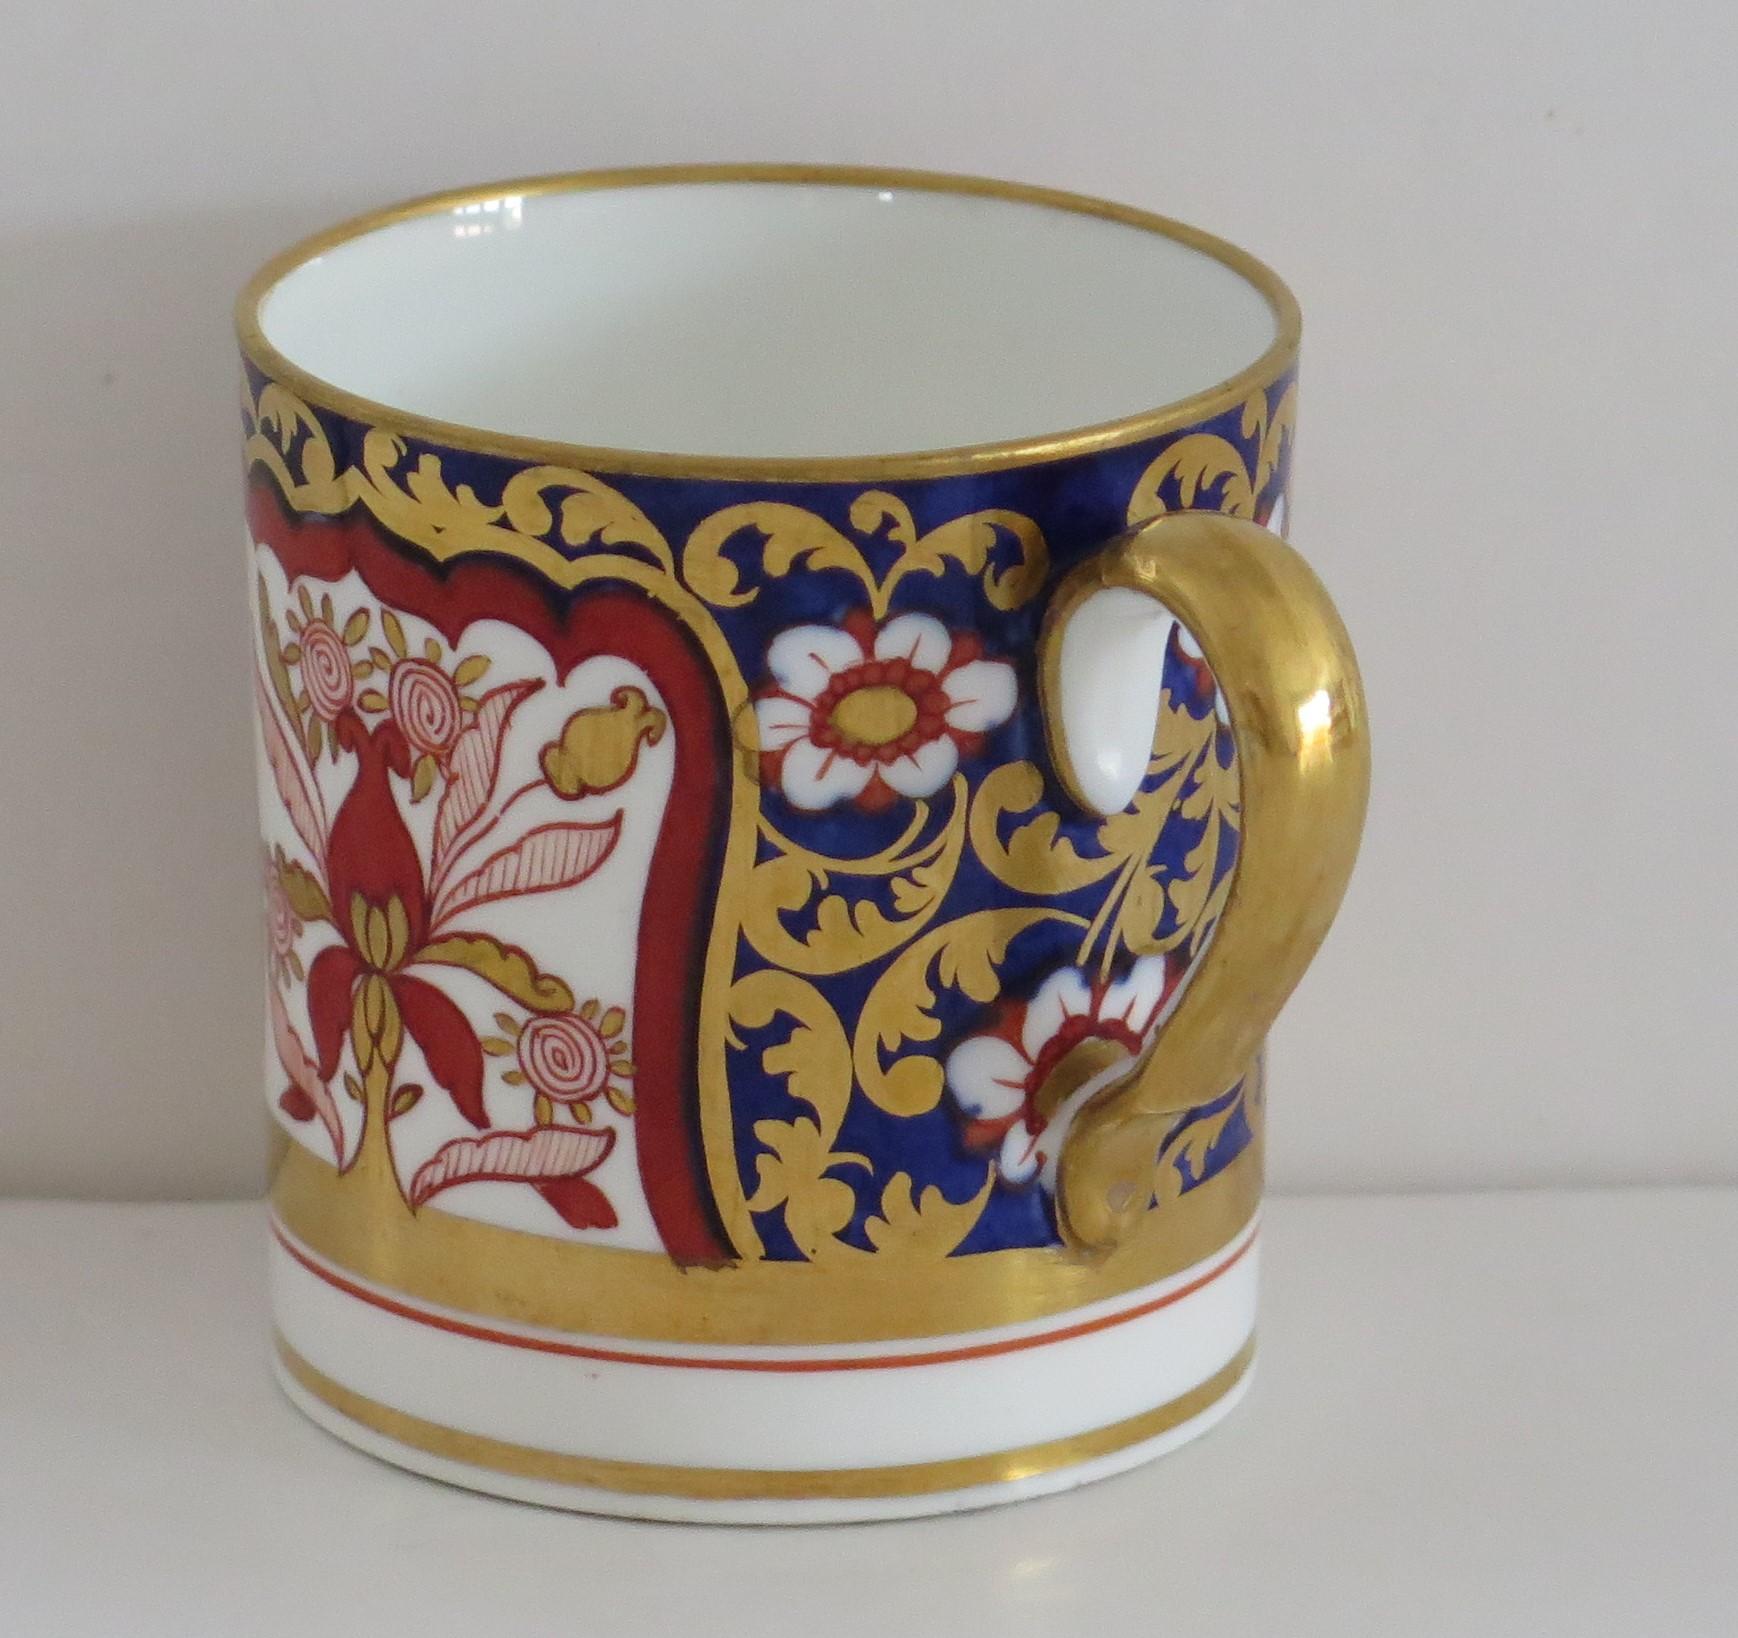 Chinoiserie Copeland 'Spode' Porcelain Coffee Can Finely Hand Painted & Gilded, circa 1860 For Sale